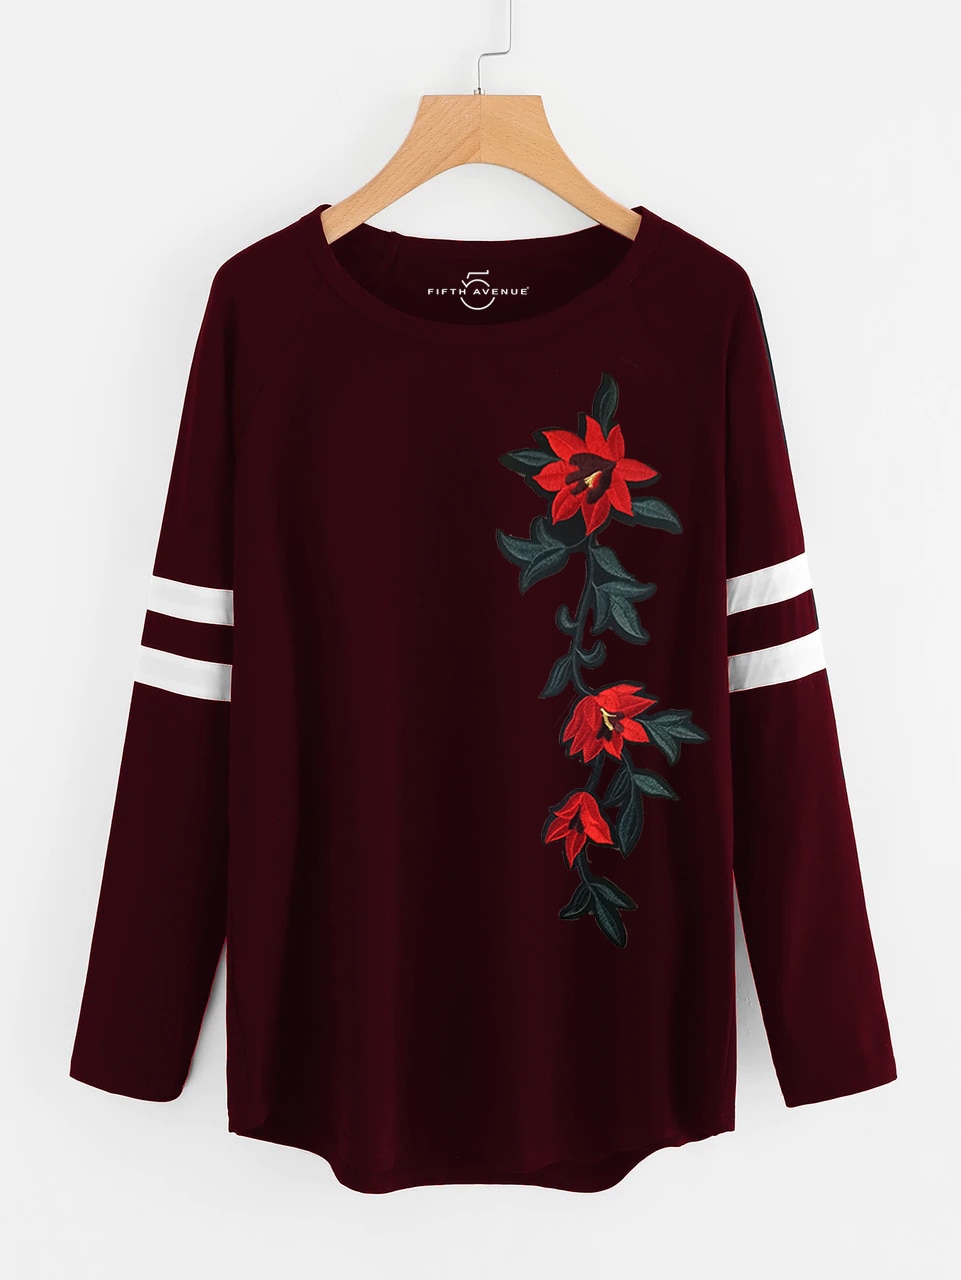 /2019/06/fifth-avenue-womens-naza-full-sleeves-embroidered-ripzt40-t-shirt-maroon-image1.jpeg